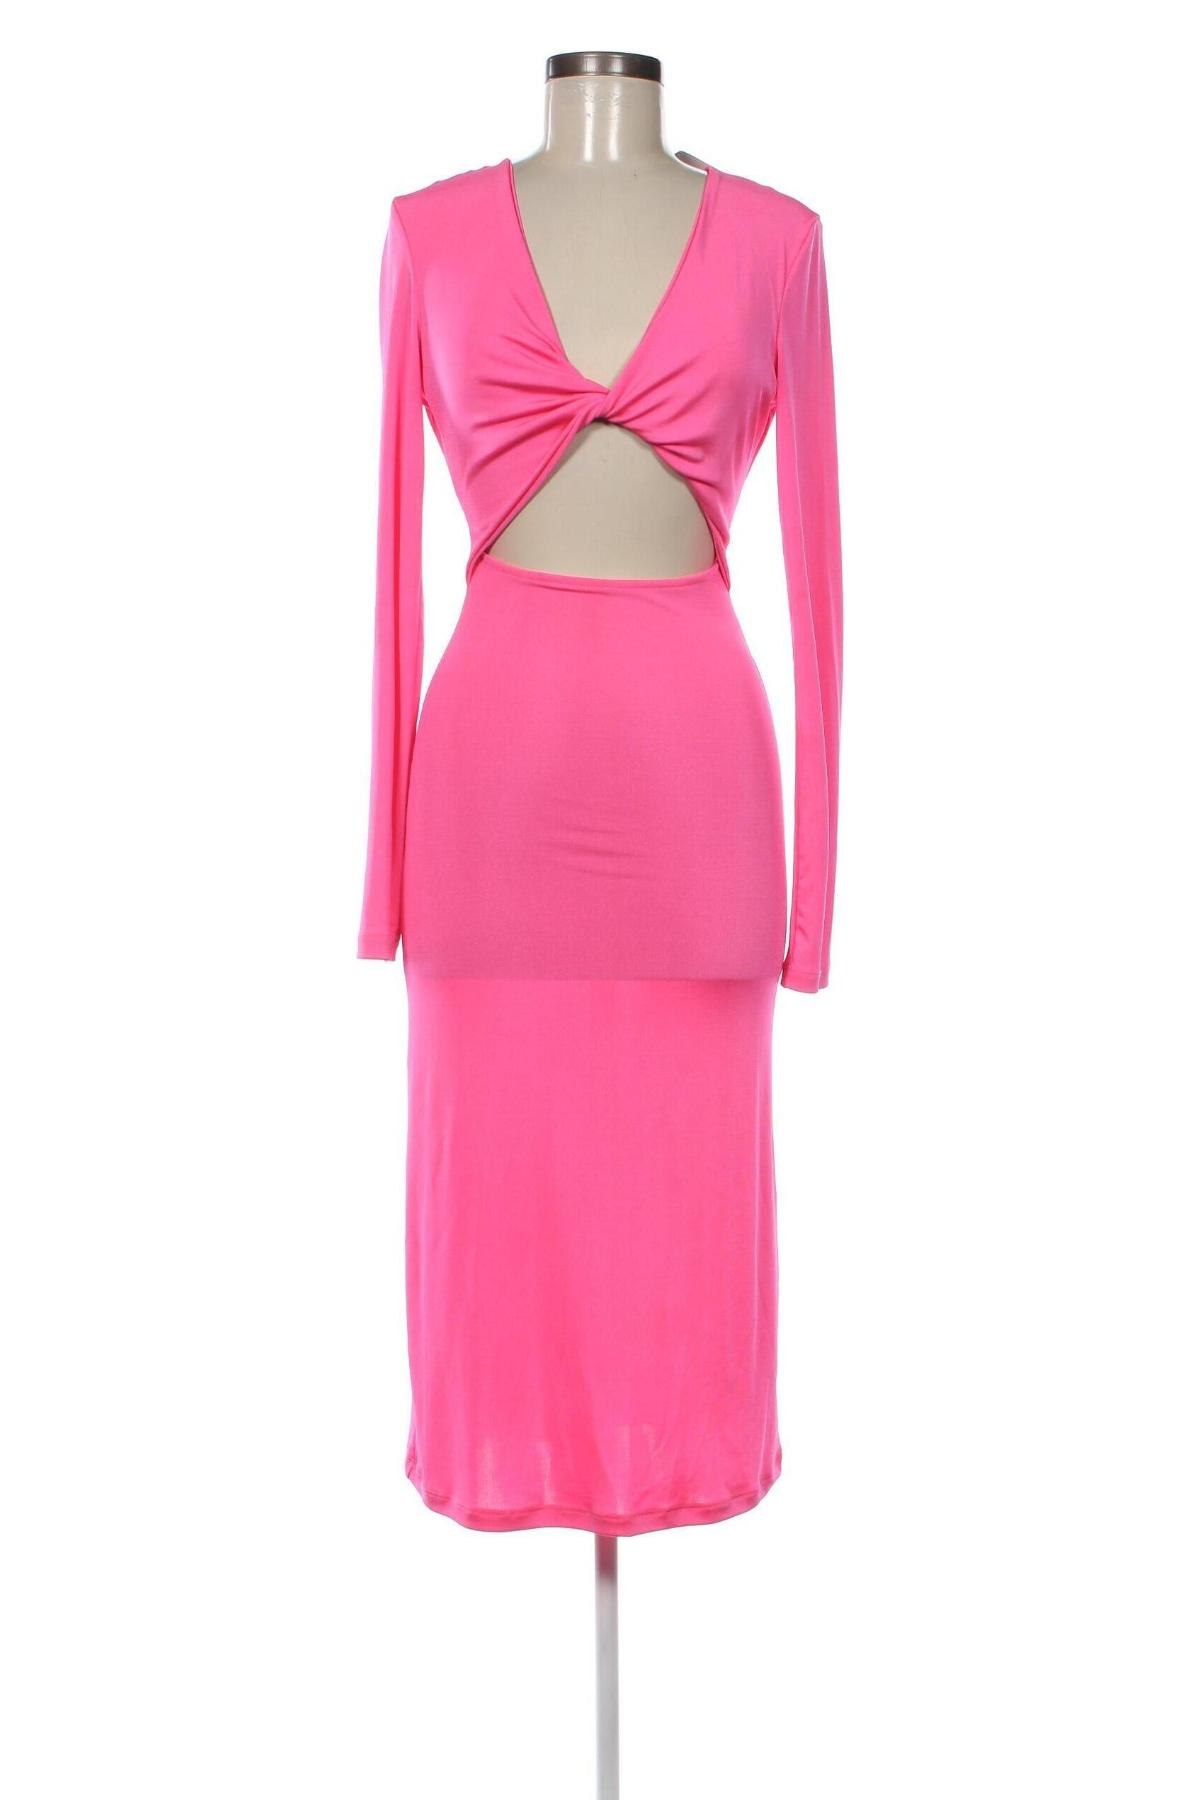 Kleid Katy Perry exclusive for ABOUT YOU, Größe S, Farbe Rosa, Preis € 14,72